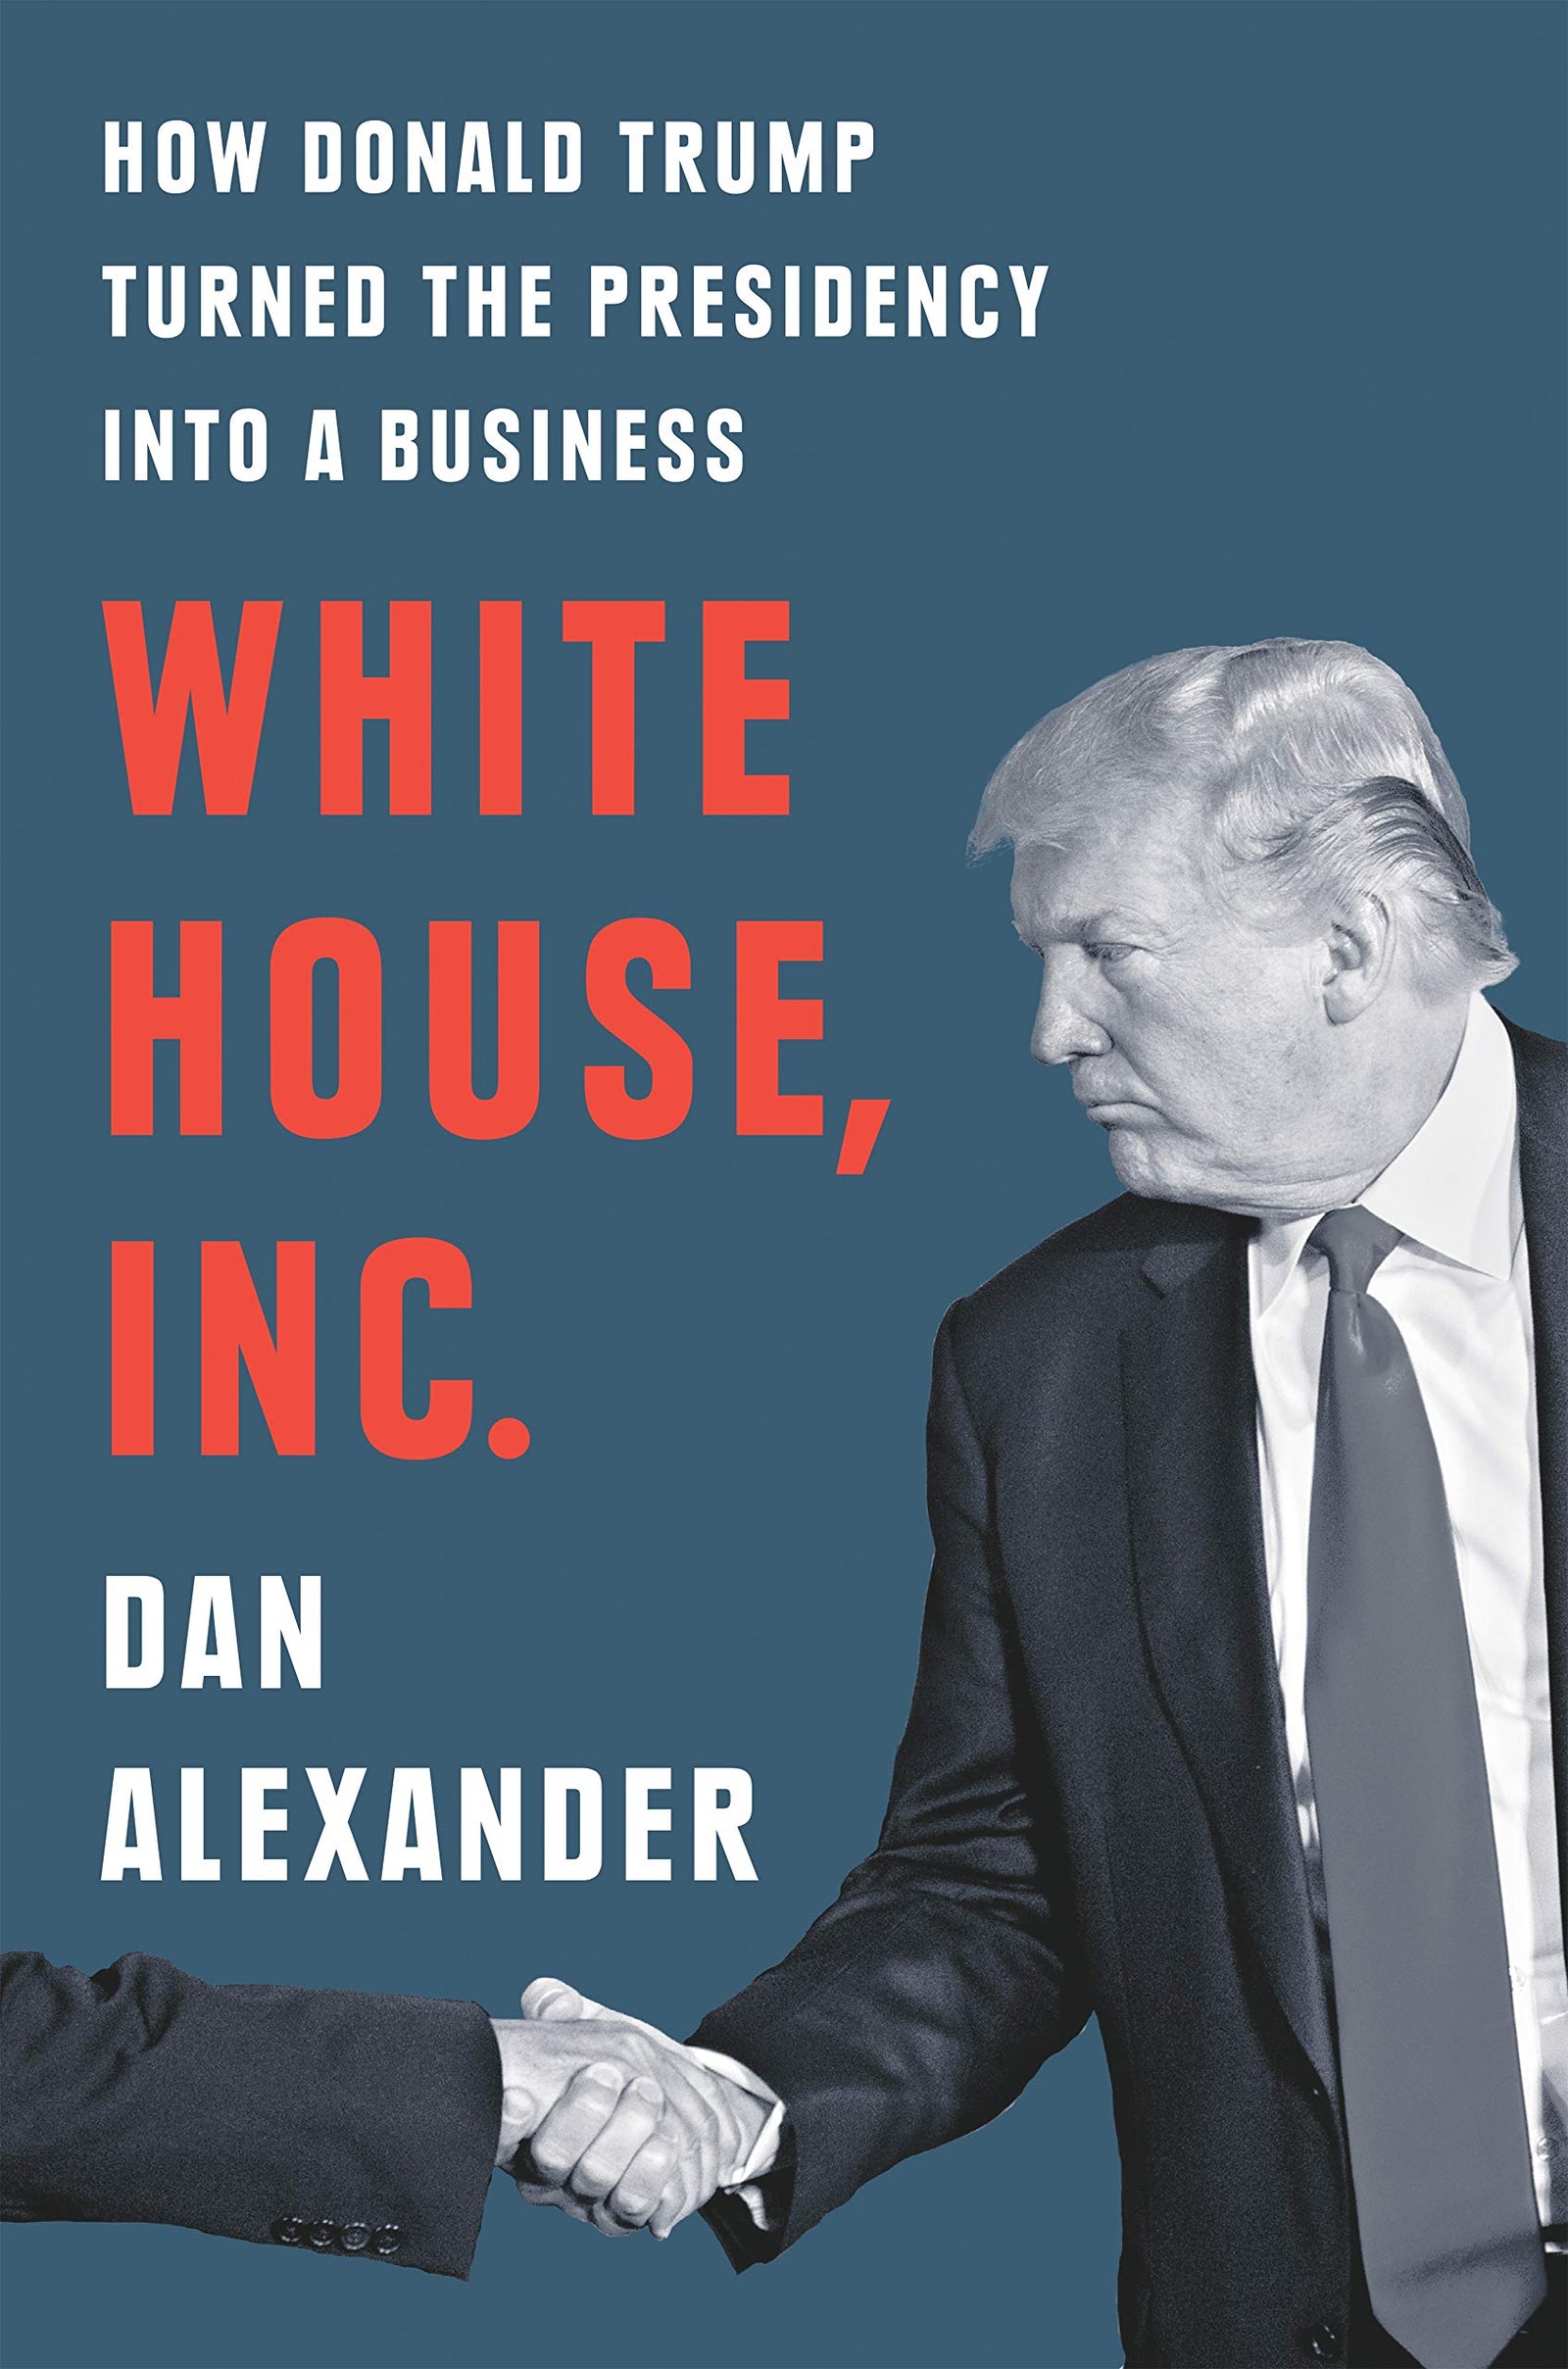 White House, Inc.: How Donald Trump Turned the Presidency Into a Business